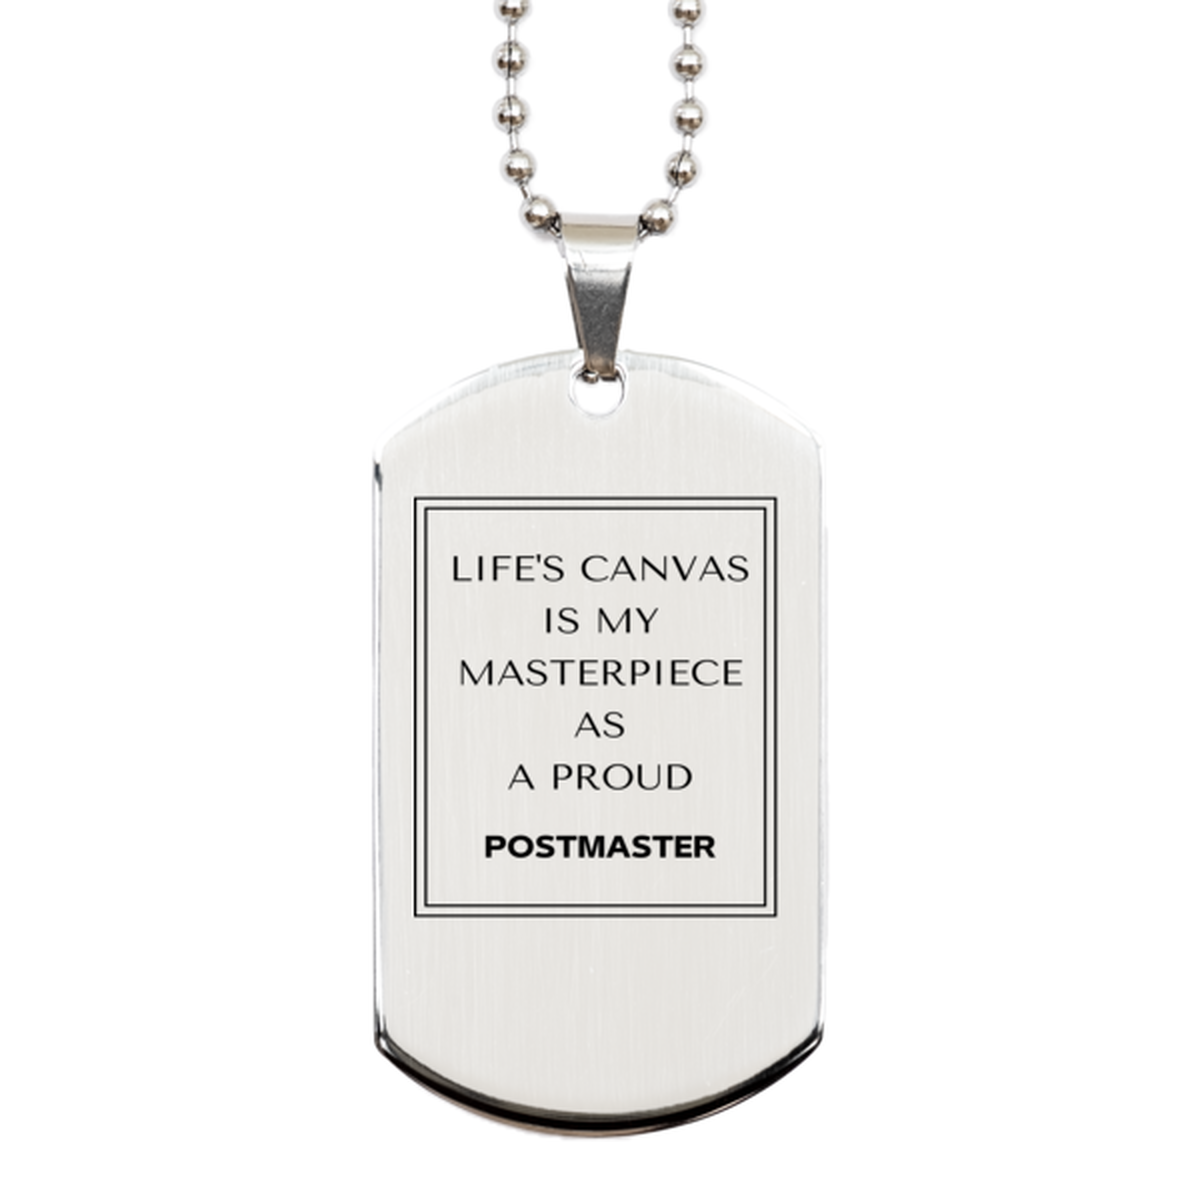 Proud Postmaster Gifts, Life's canvas is my masterpiece, Epic Birthday Christmas Unique Silver Dog Tag For Postmaster, Coworkers, Men, Women, Friends